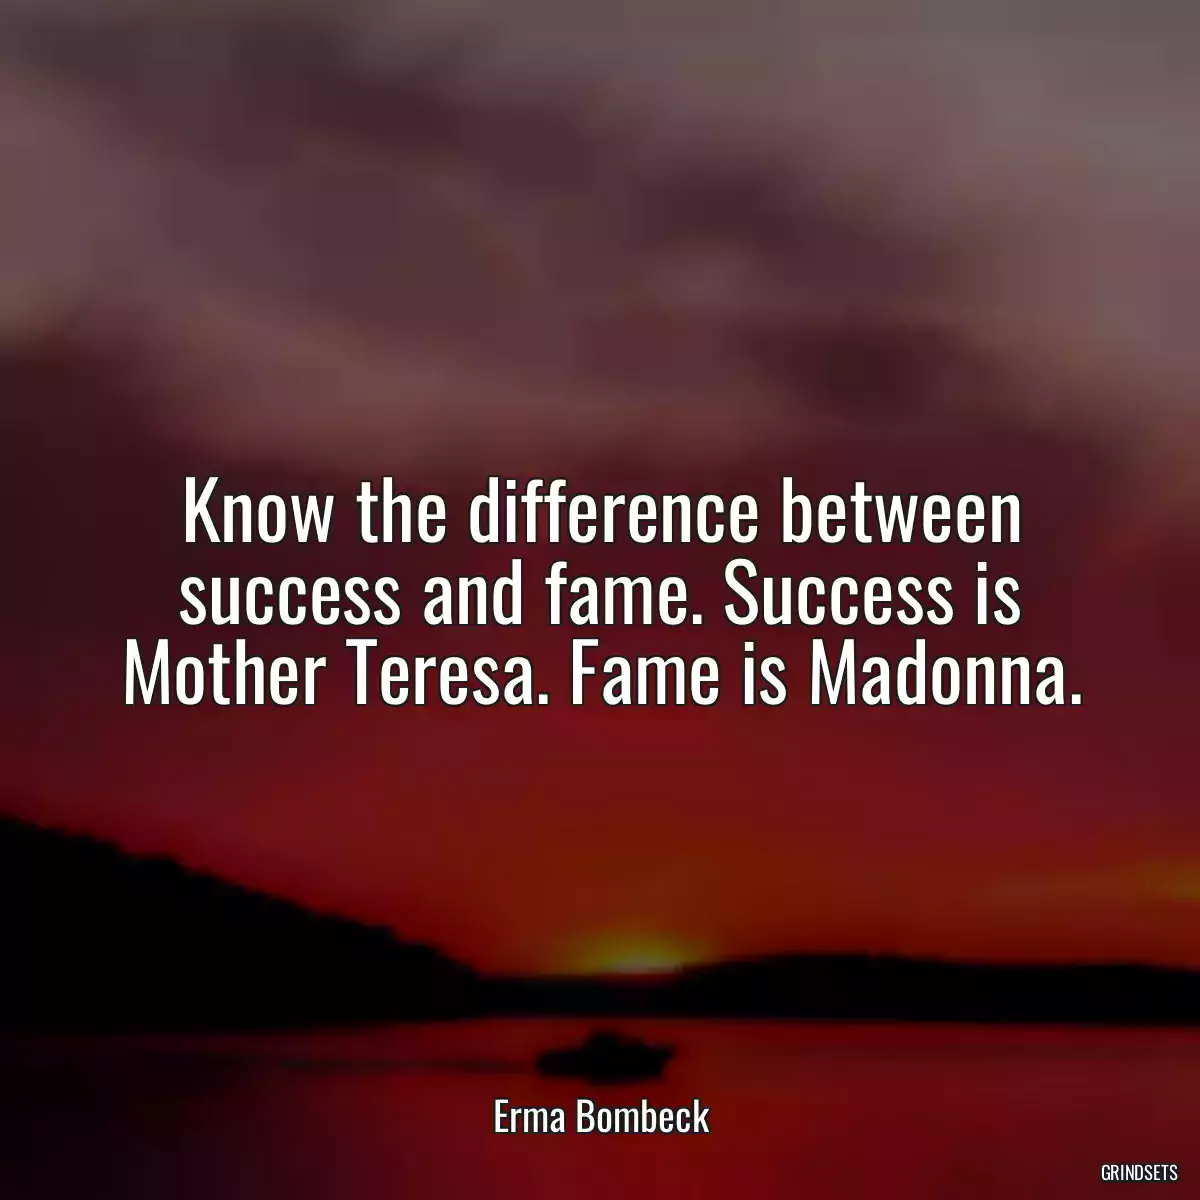 Know the difference between success and fame. Success is Mother Teresa. Fame is Madonna.